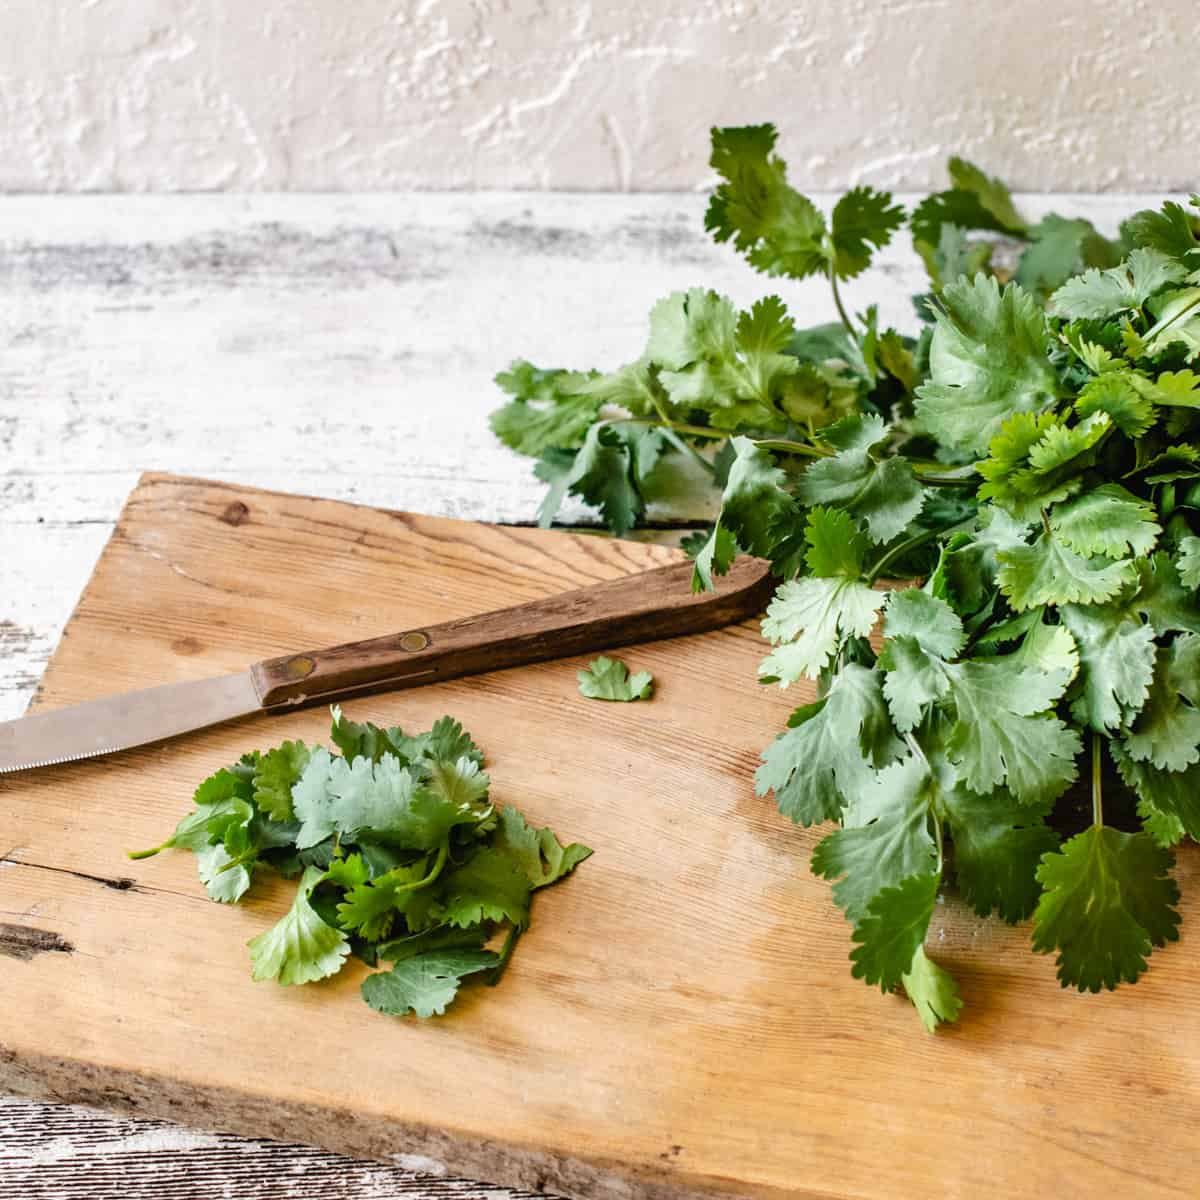 Fresh cilantro stems and leaves on a wooden cutting board with a knife.